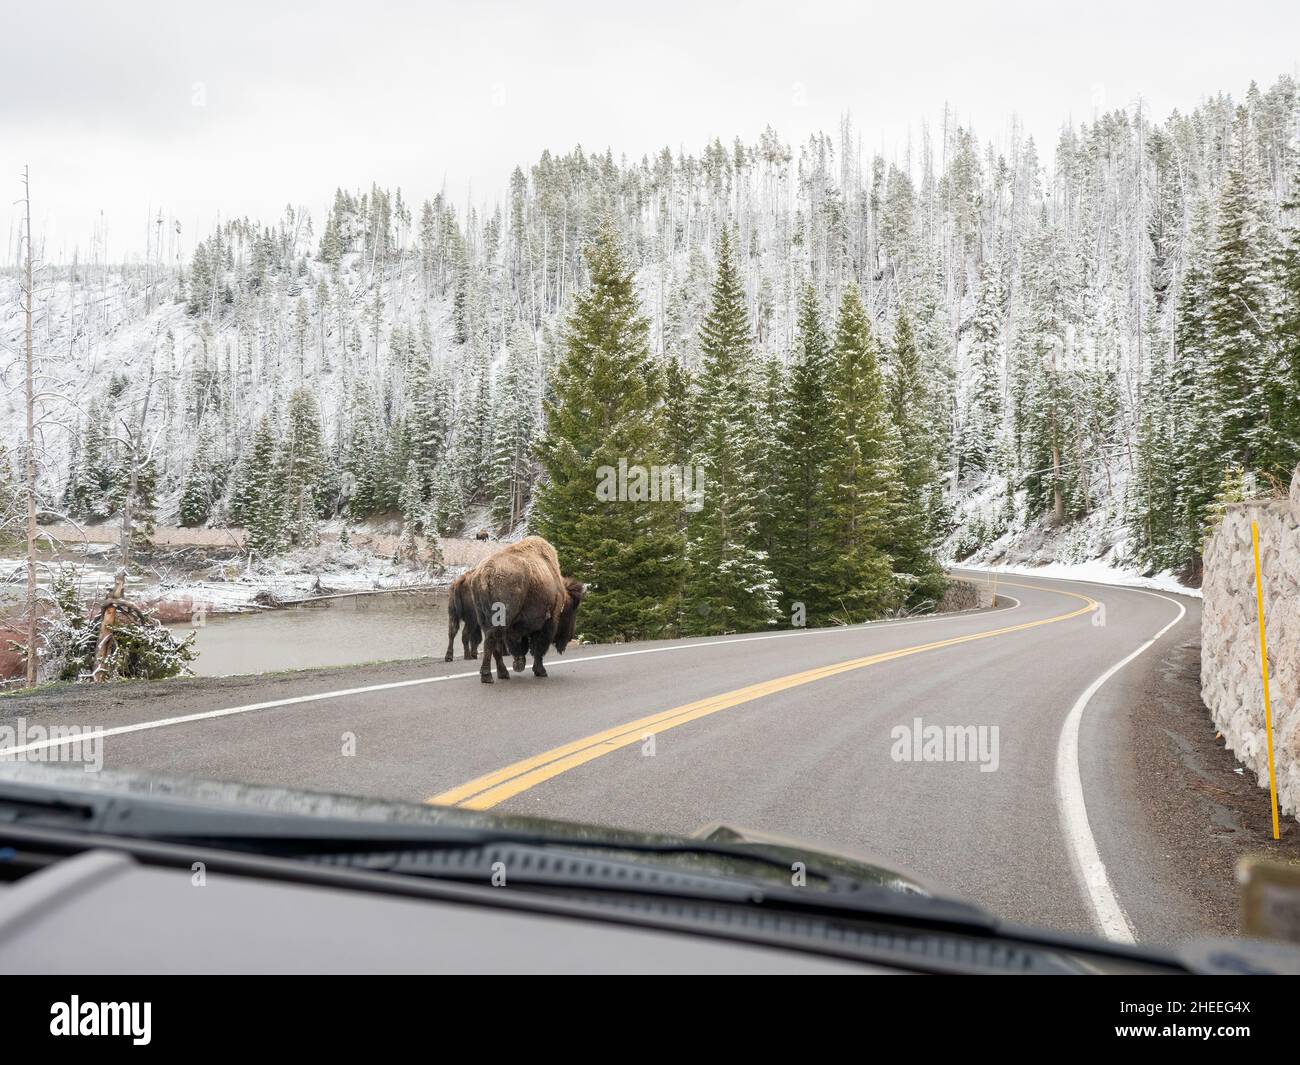 Adult bison, Bison bison, on the highway in snow in Yellowstone National Park, Wyoming. Stock Photo